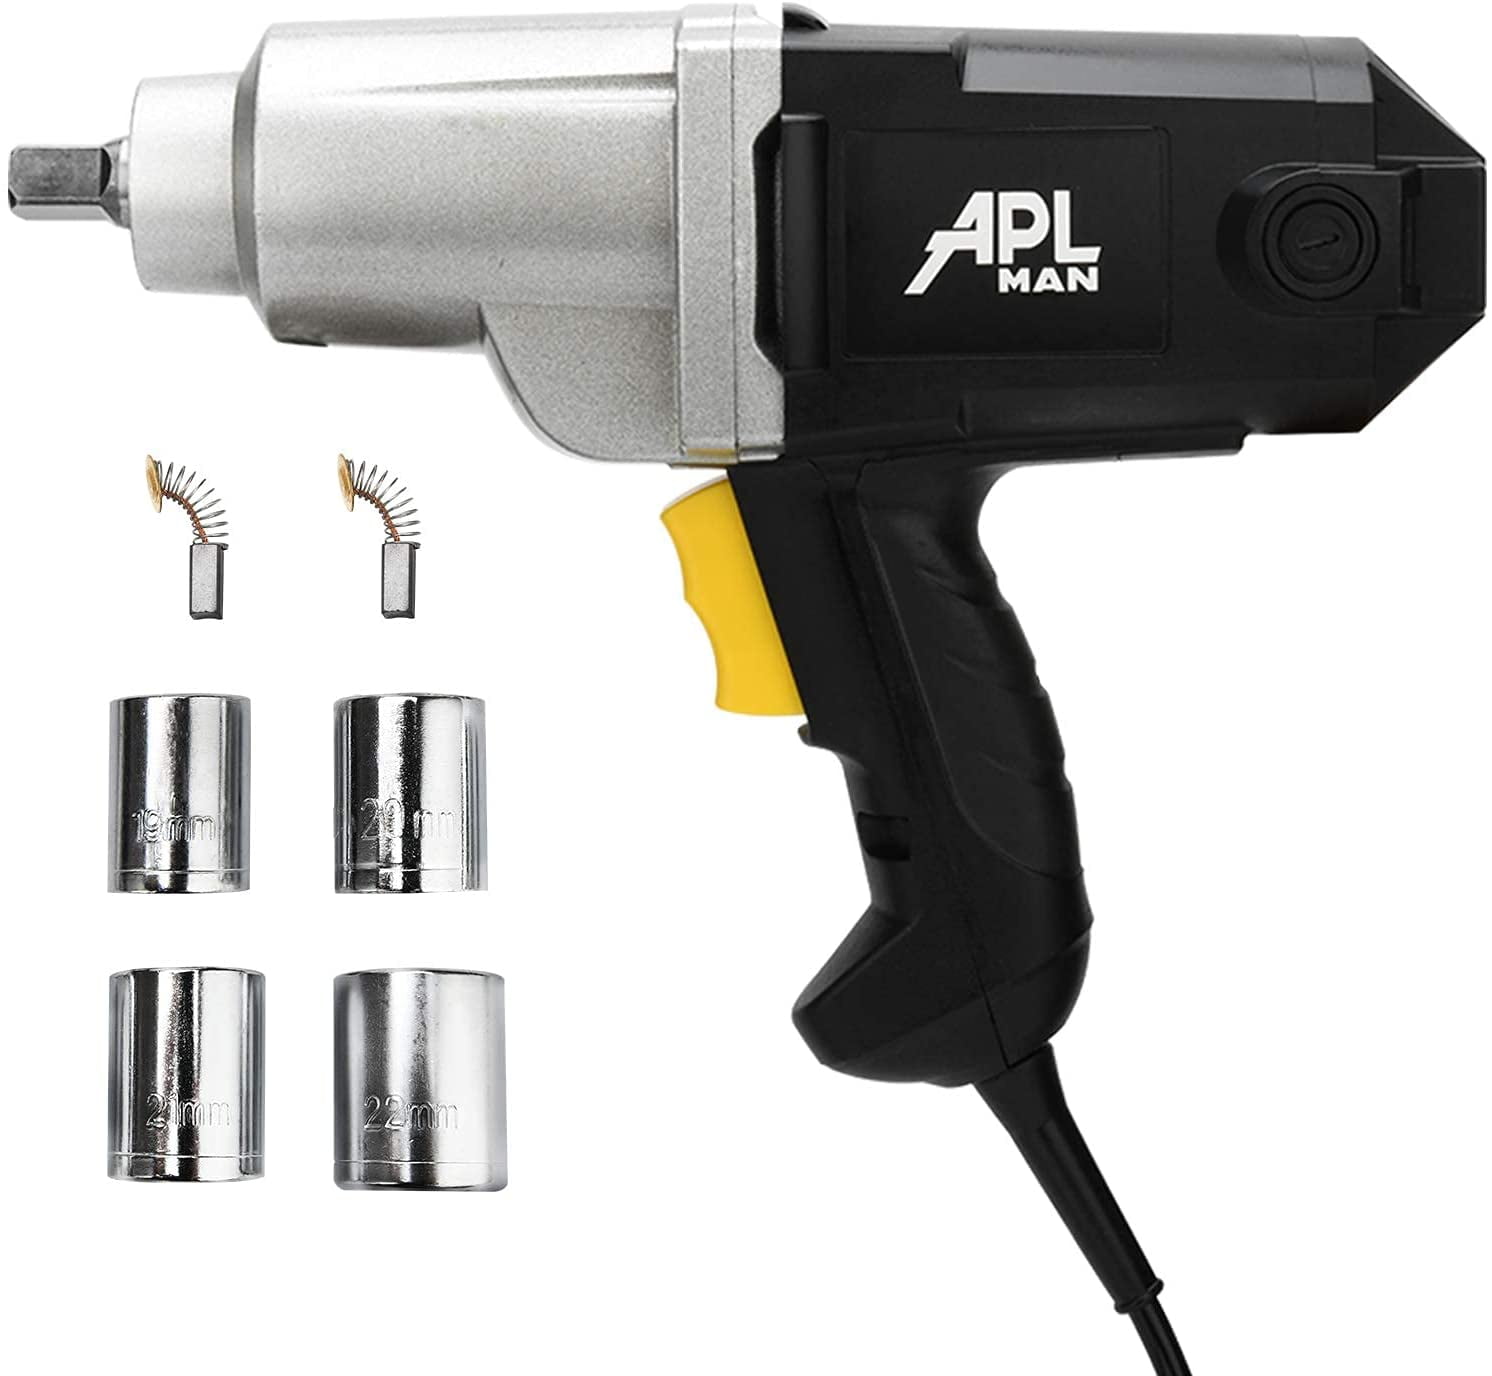 BEST PRICE 2100 RPM BRAND NEW ITEM lb 1/2 in Electric Impact Wrench 230 ft 